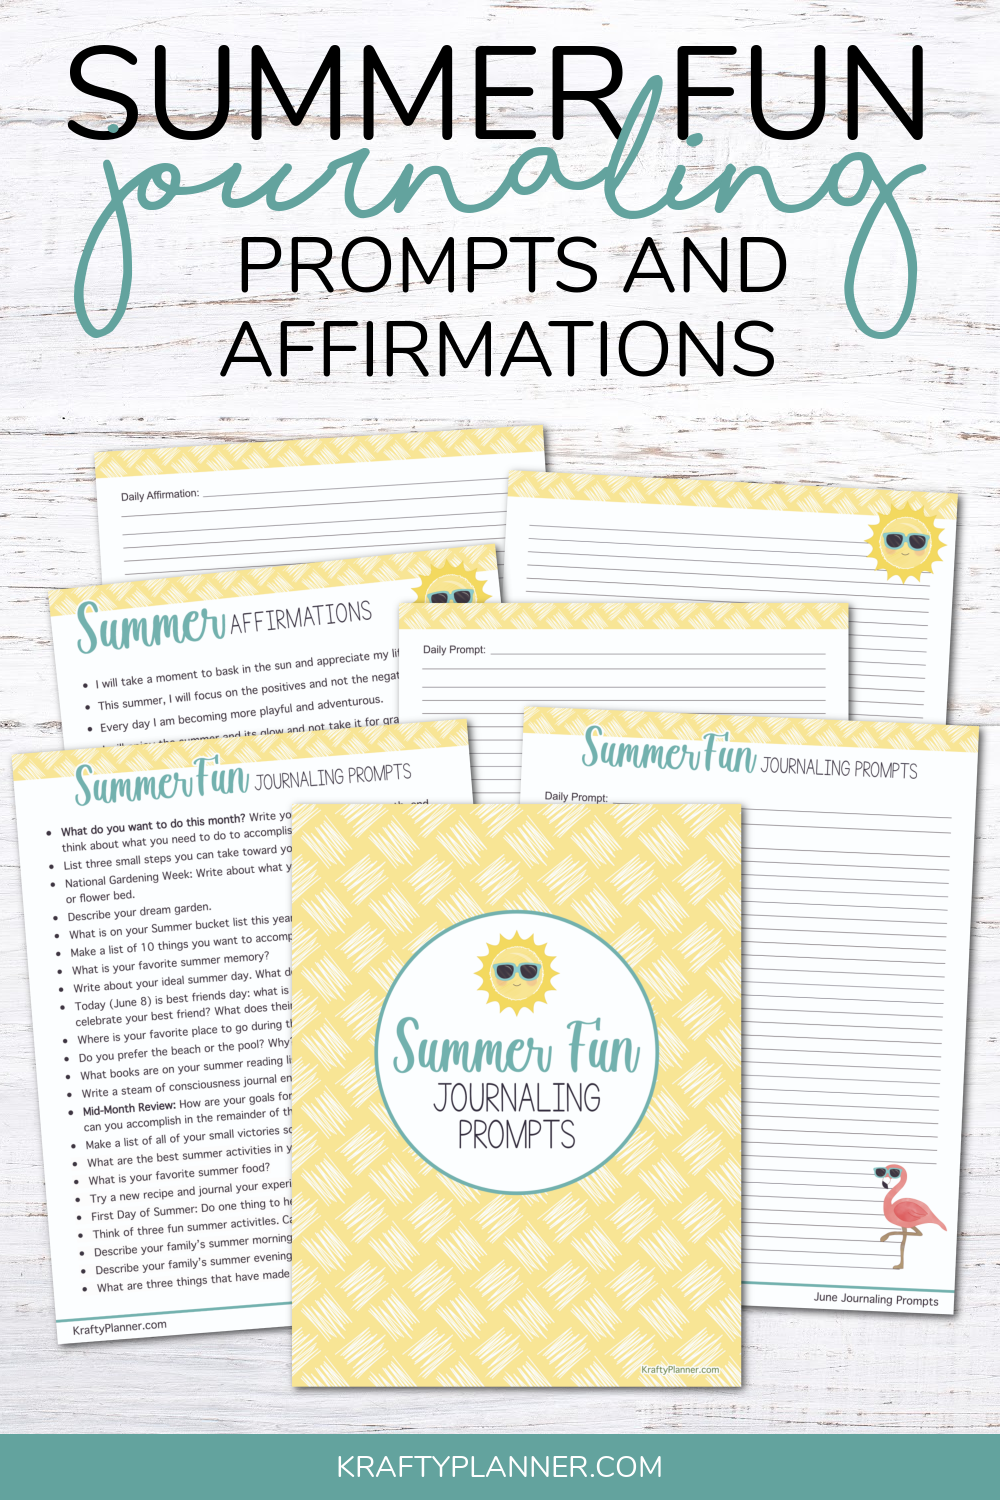 Summer Fun Journaling Prompts and Affirmations